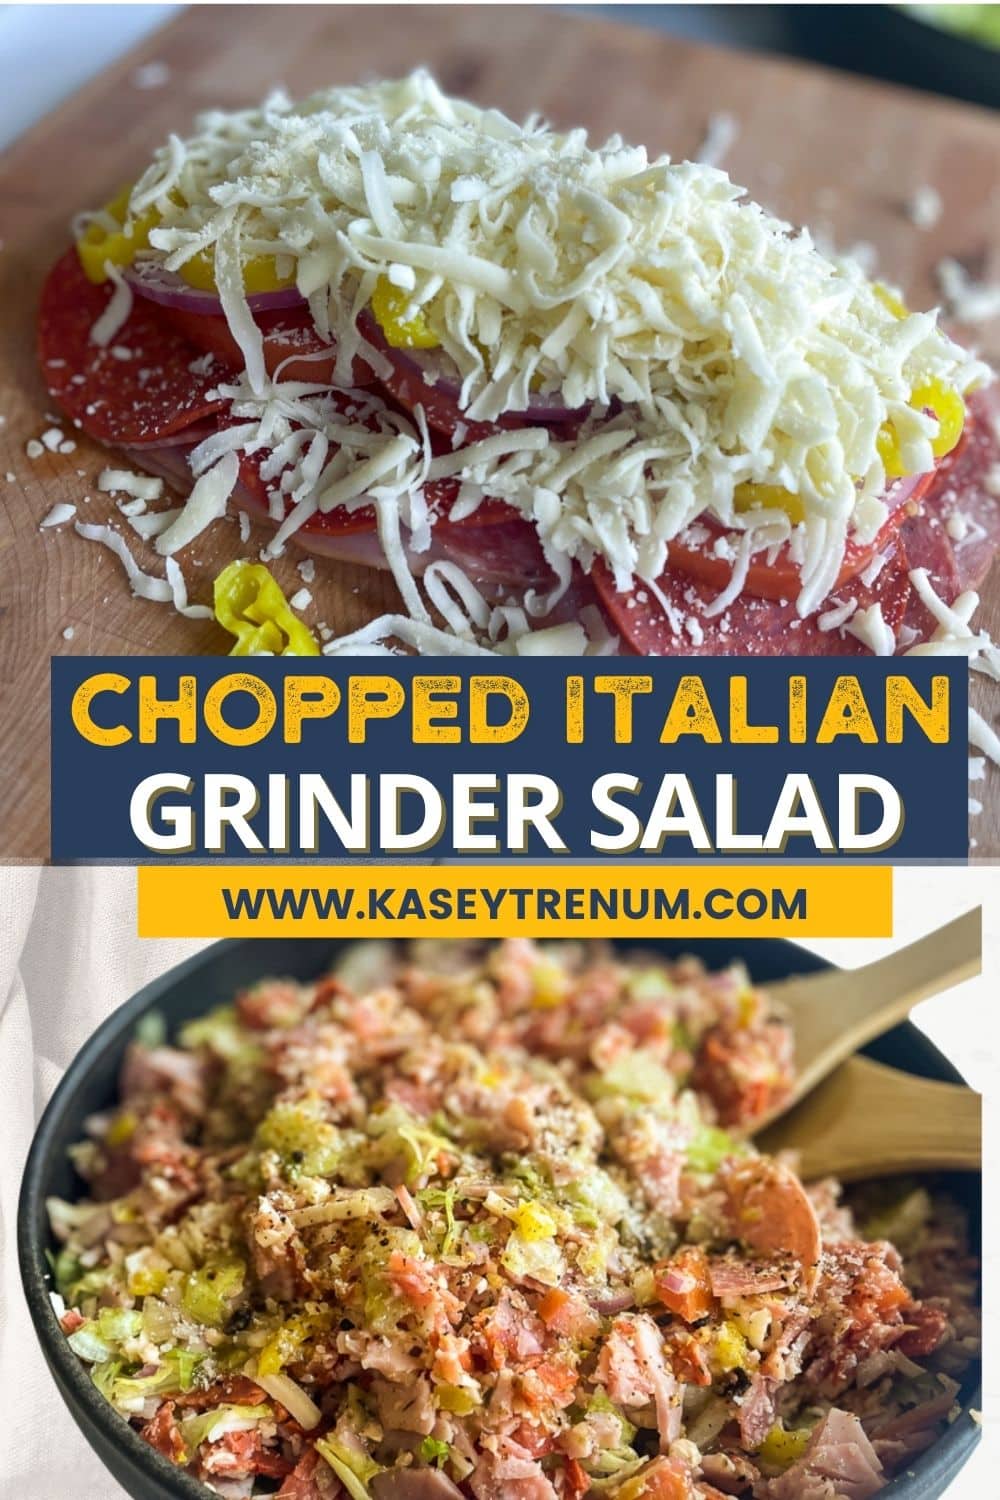 Collage featuring two images of the Chopped Italian Grinder Salad - a close-up of the salad ingredients, including shredded lettuce, tomatoes, and mozzarella cheese, and the finished salad tossed together in a bowl with title text overlay.